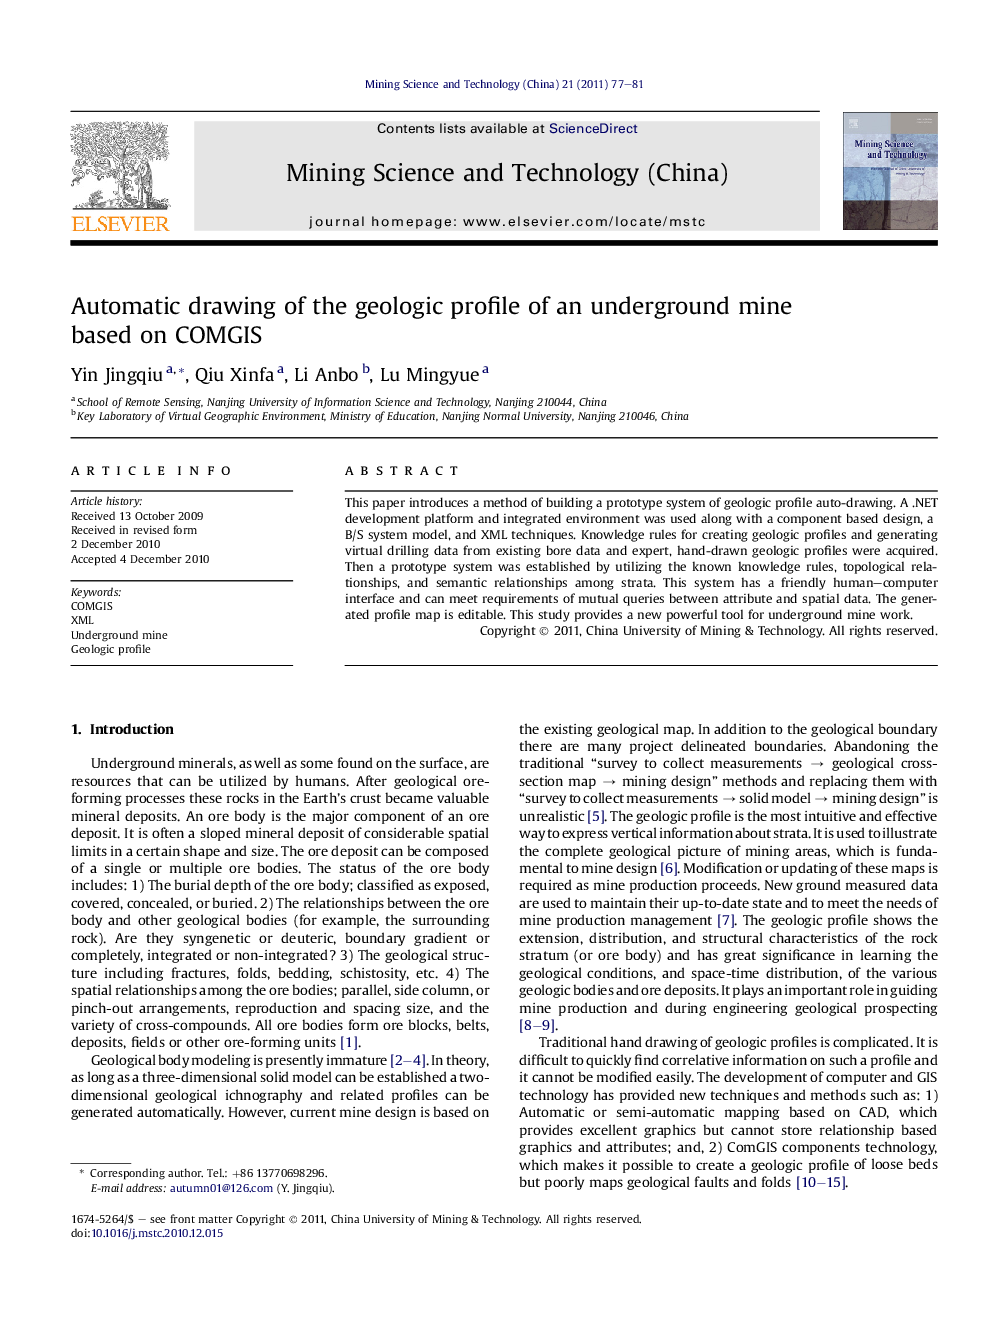 Automatic drawing of the geologic profile of an underground mine based on COMGIS